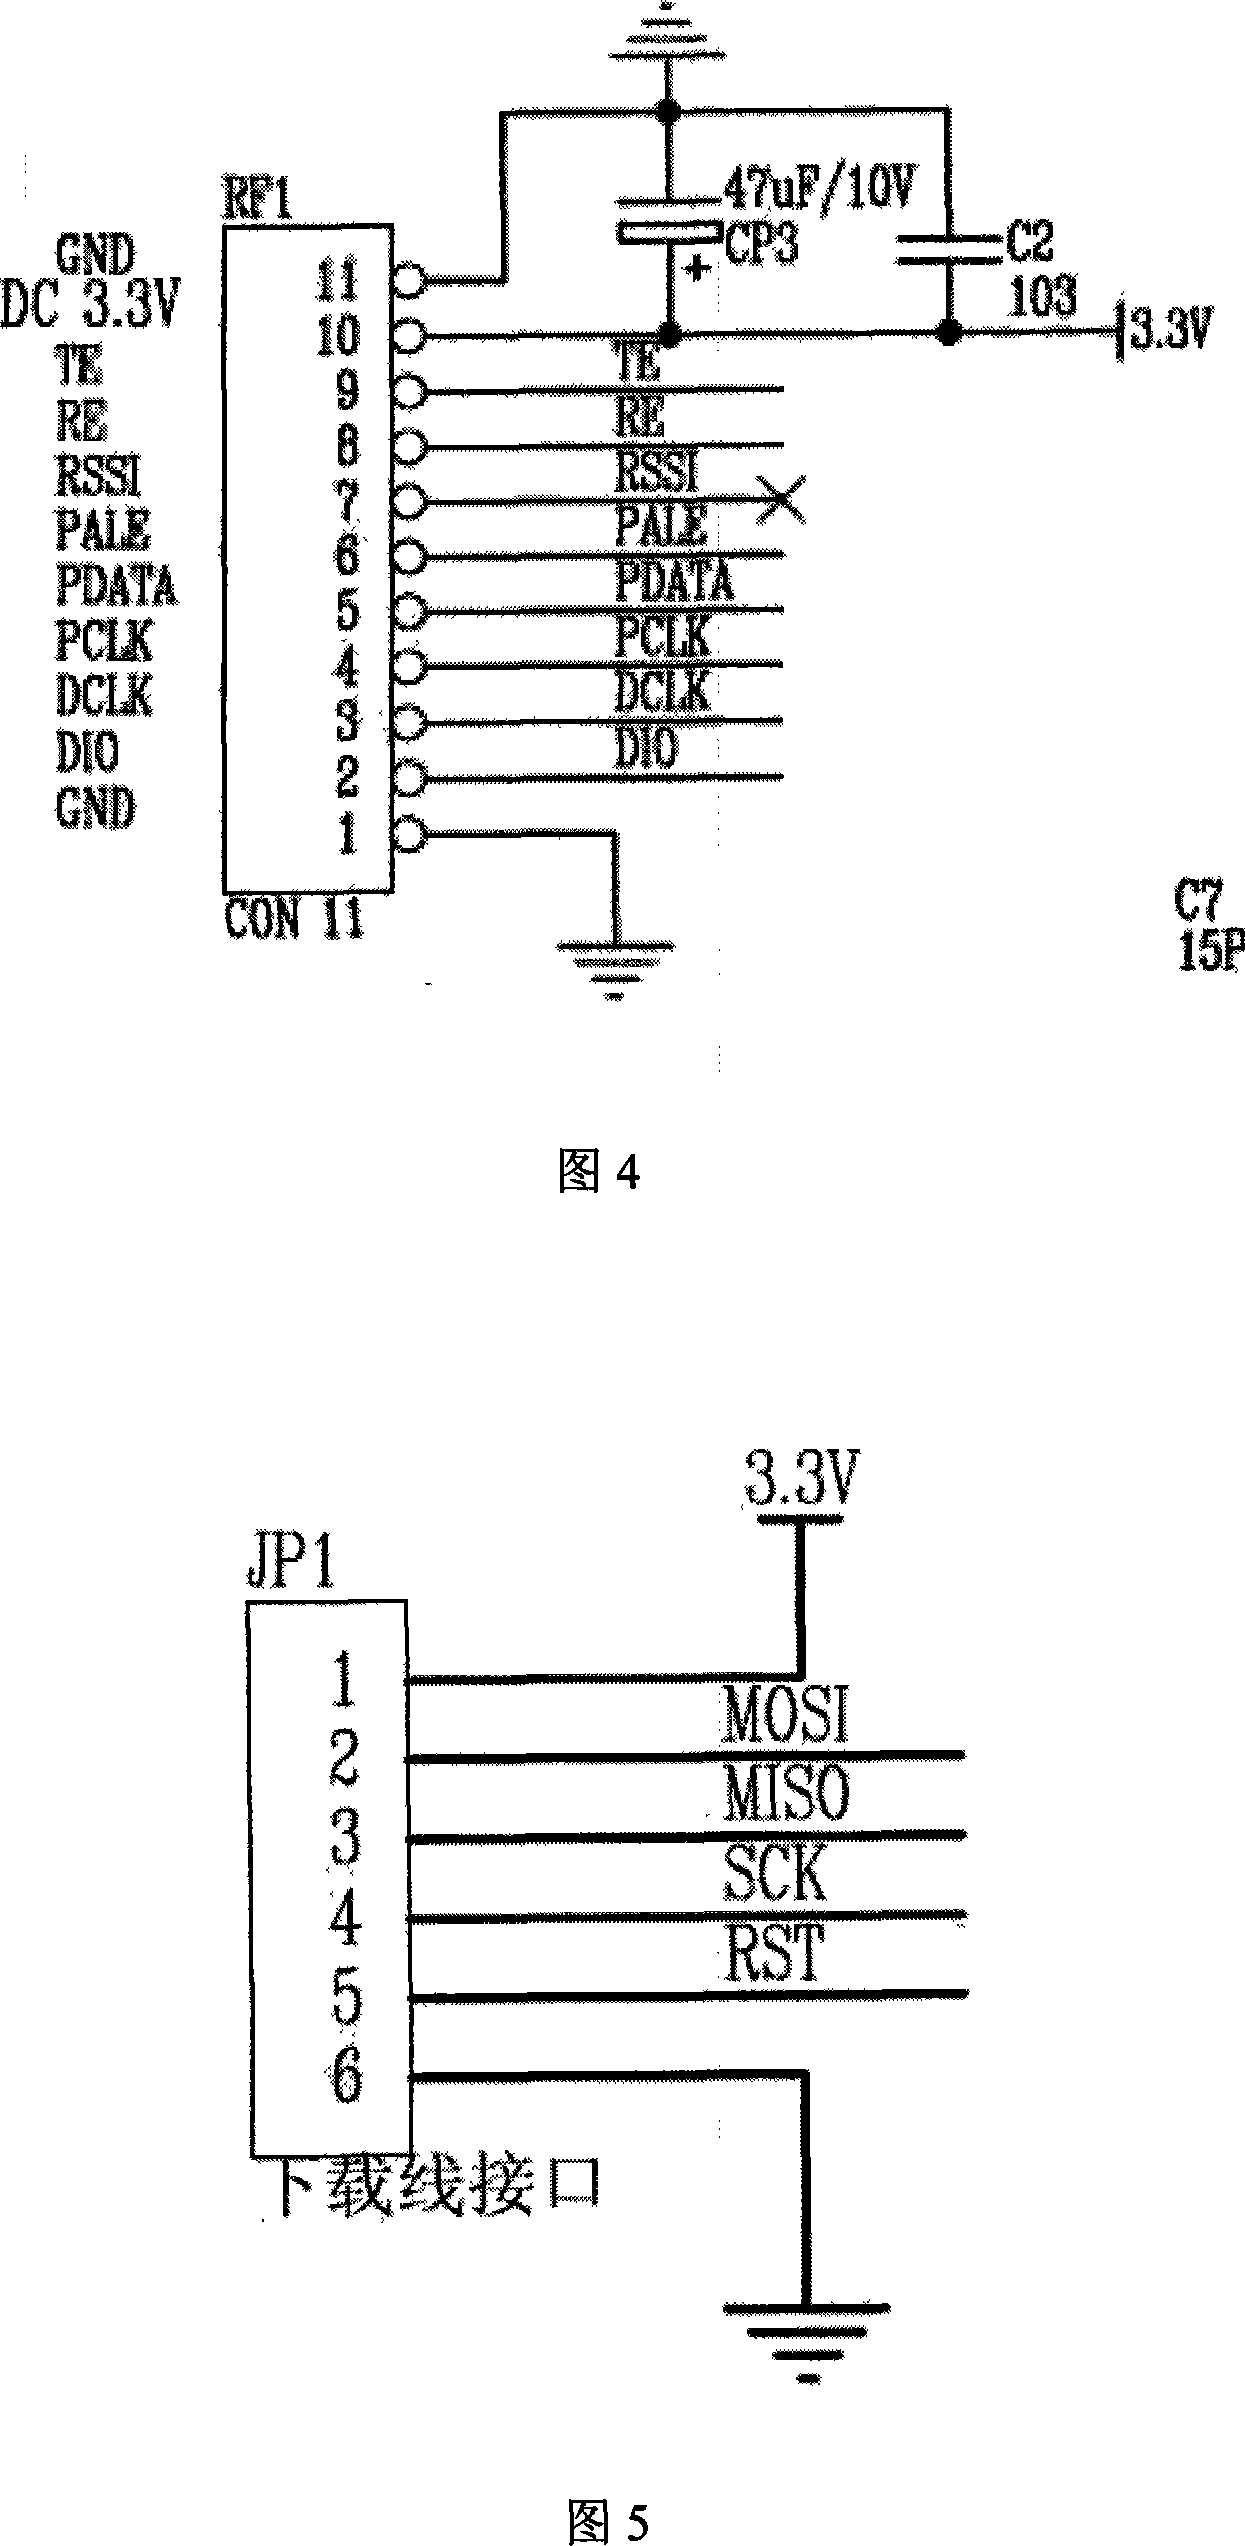 A RF transceiver hardware structure for implementing bidirectional communication and relay function